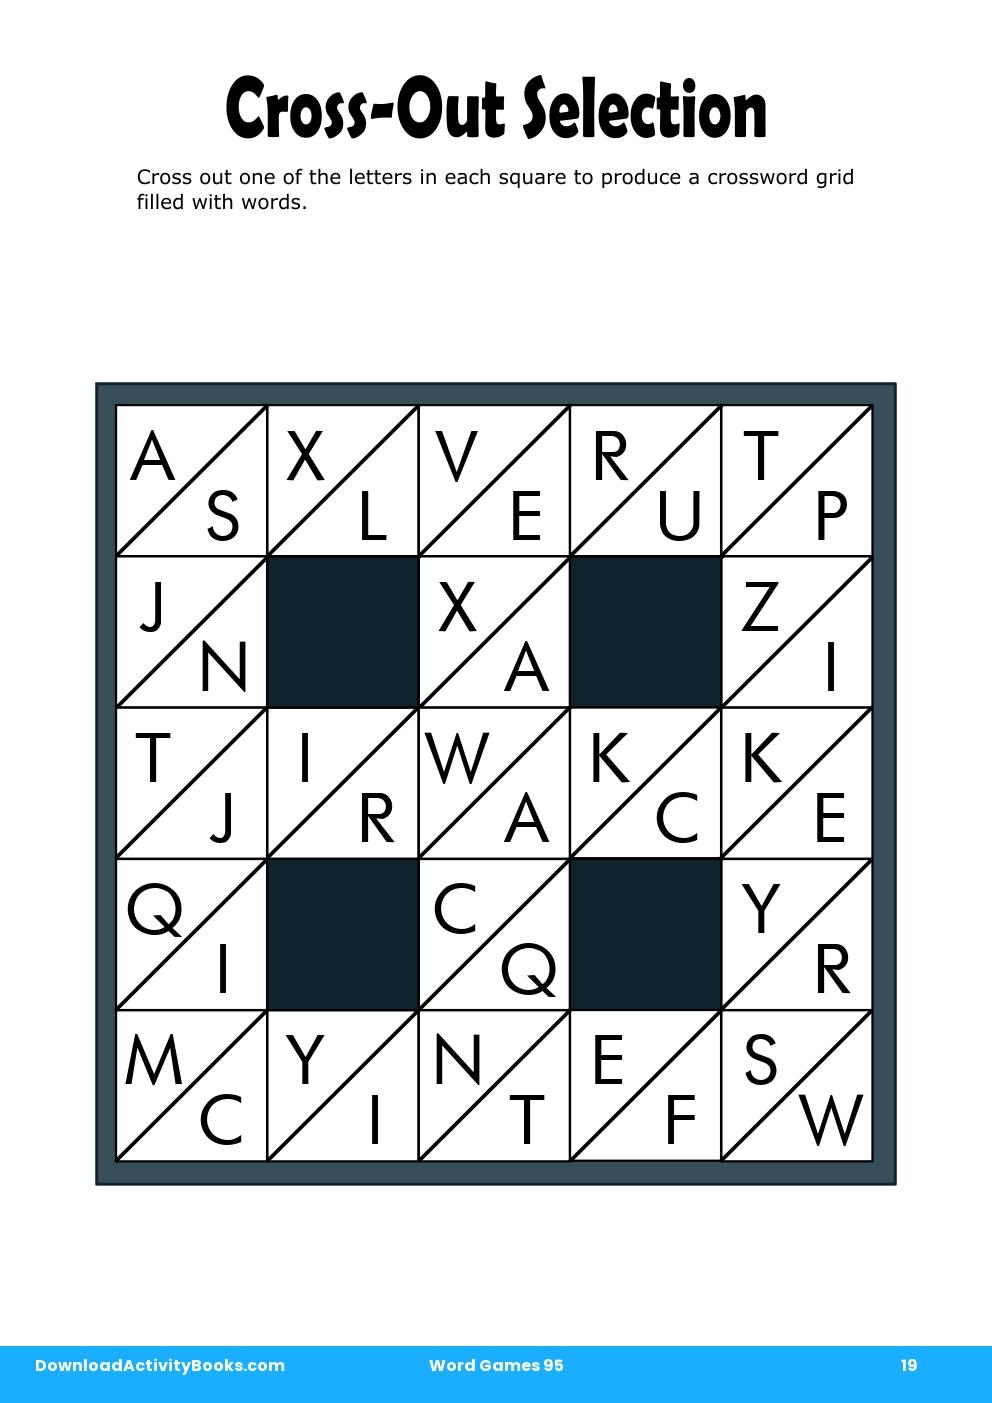 Cross-Out Selection in Word Games 95